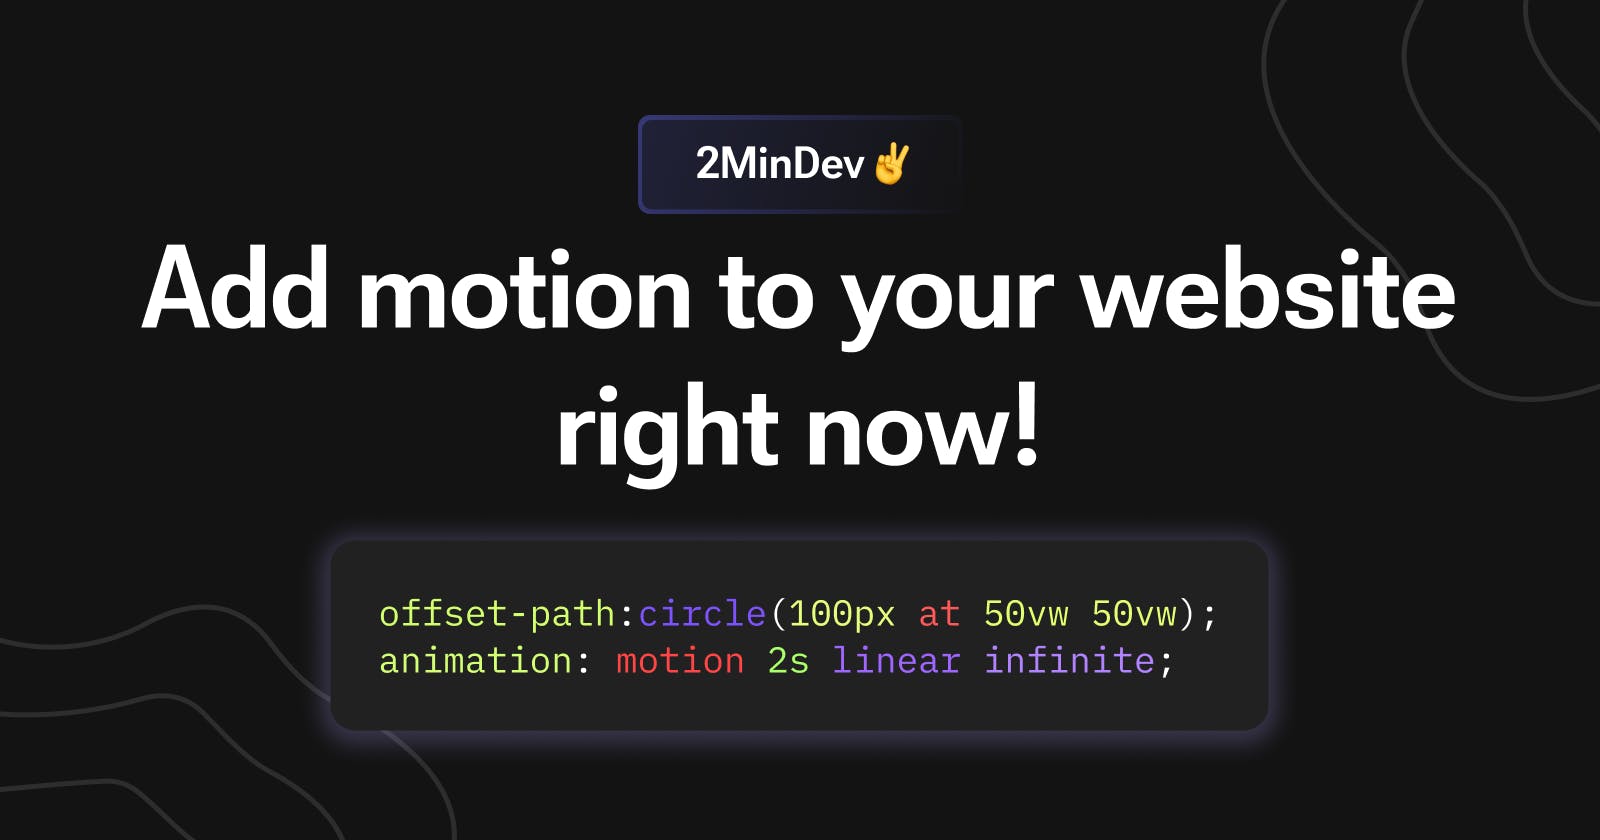 Add motion to your website right now!